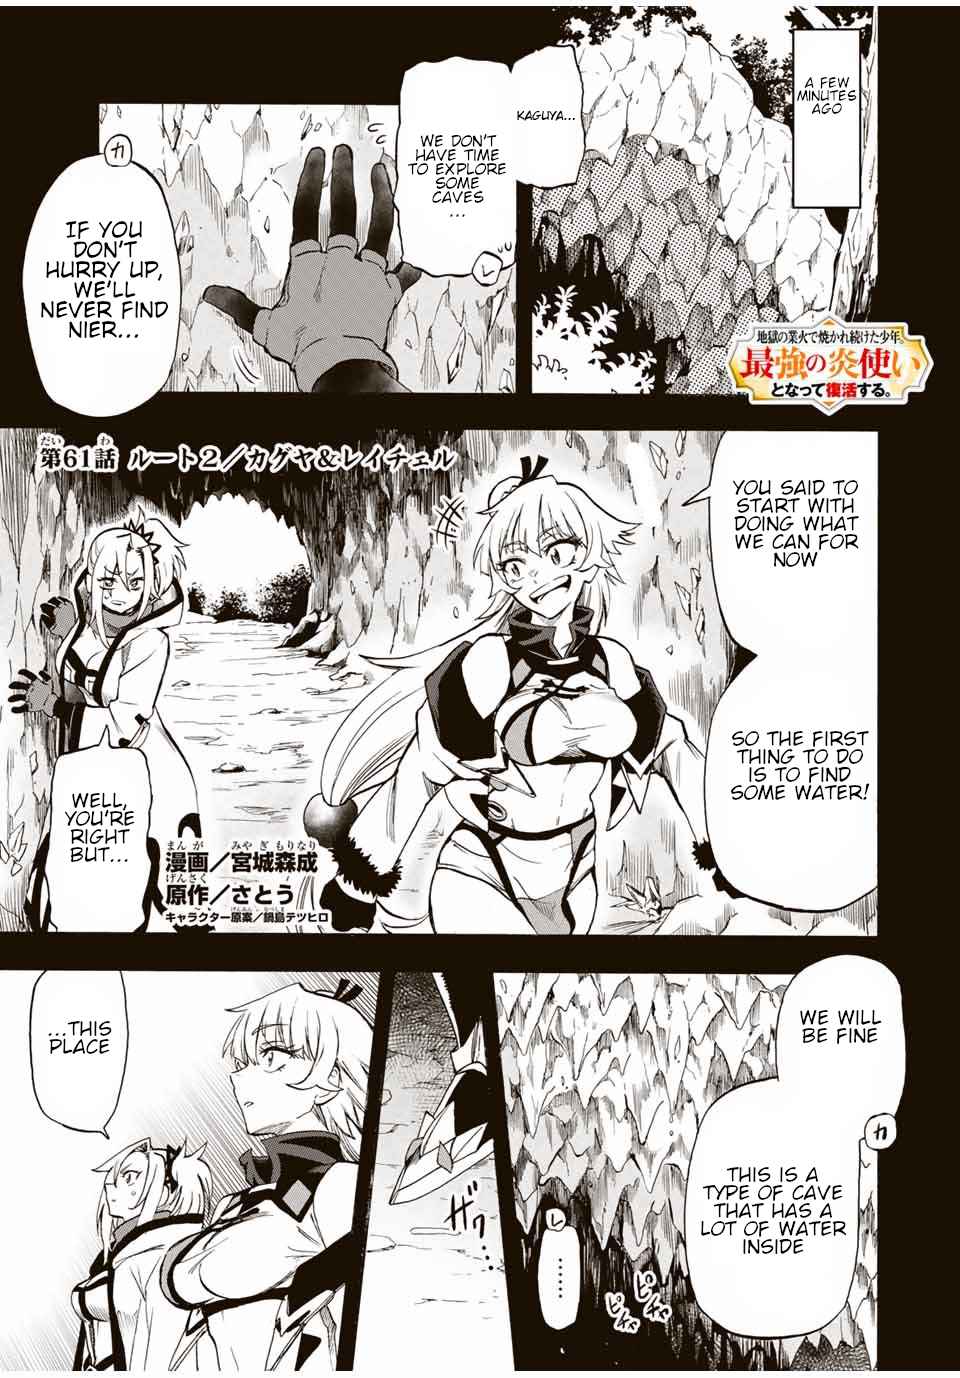 The Boy Who Had Been Continuously Burned By The Fires Of Hell. Revived, He Becomes The Strongest Flame User. - Page 2